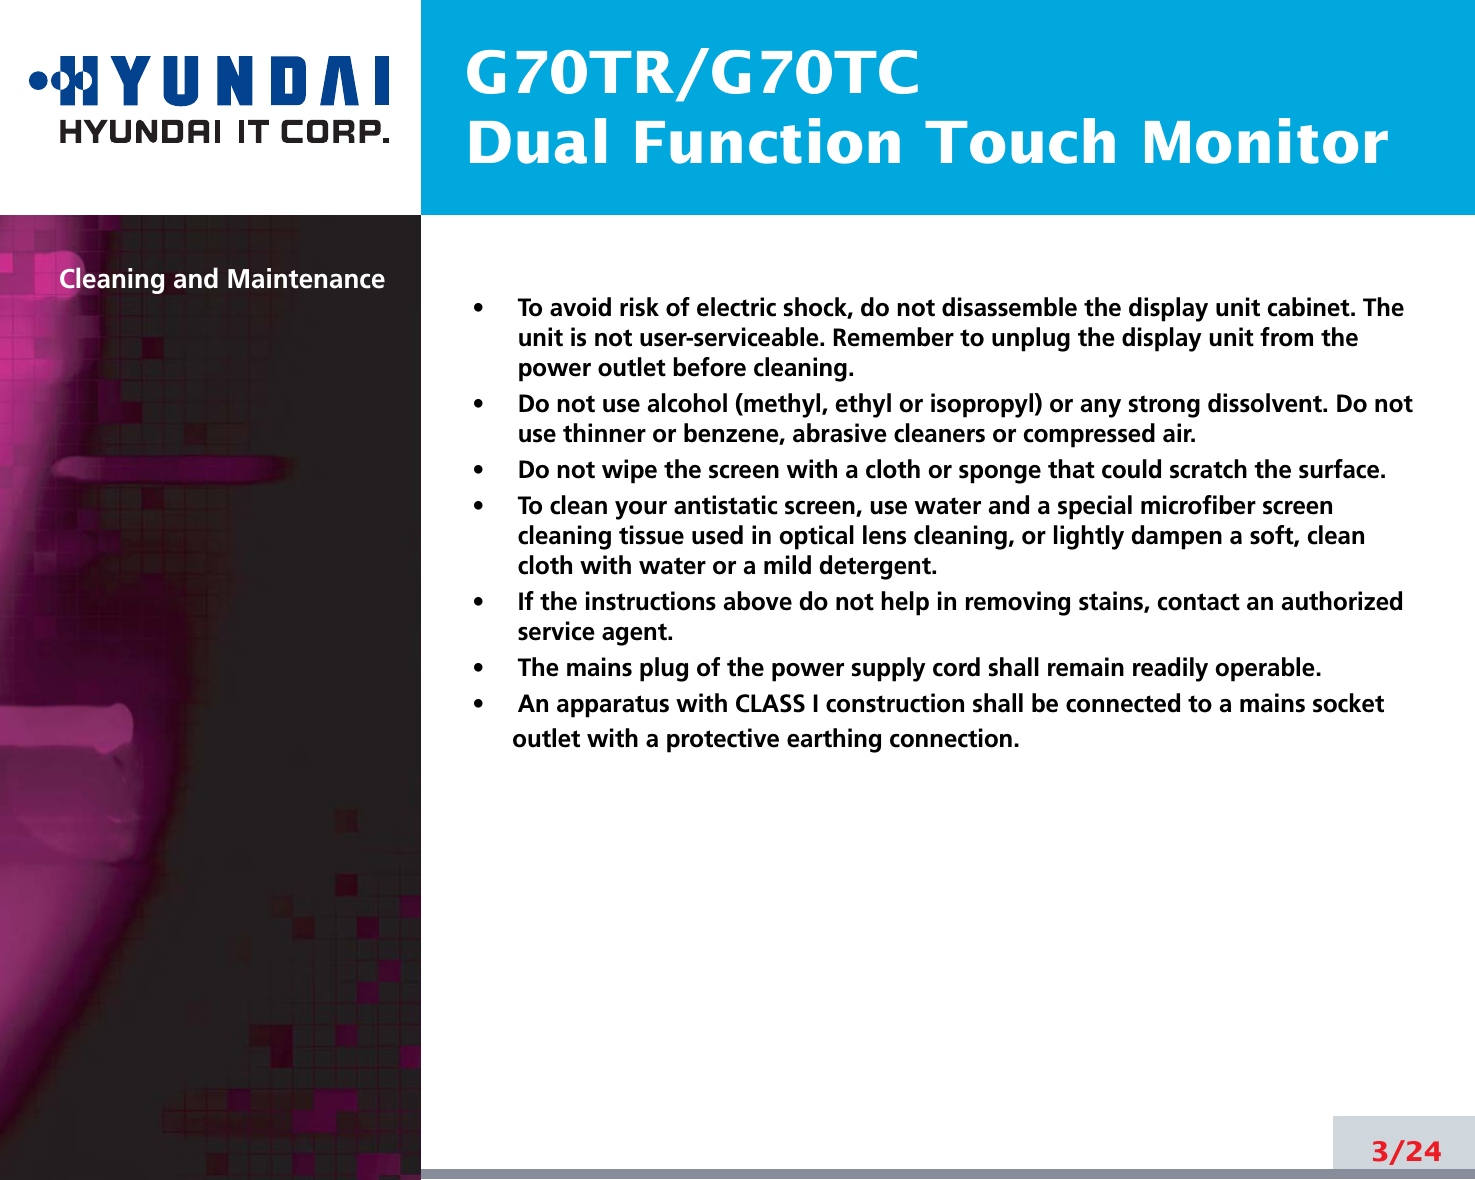 G70TR/G70TCDual Function Touch MonitorCleaning and Maintenance•     To avoid risk of electric shock, do not disassemble the display unit cabinet. Theunit is not user-serviceable. Remember to unplug the display unit from thepower outlet before cleaning.•     Do not use alcohol (methyl, ethyl or isopropyl) or any strong dissolvent. Do notuse thinner or benzene, abrasive cleaners or compressed air.•     Do not wipe the screen with a cloth or sponge that could scratch the surface.•     To clean your antistatic screen, use water and a special microfiber screencleaning tissue used in optical lens cleaning, or lightly dampen a soft, cleancloth with water or a mild detergent.•     If the instructions above do not help in removing stains, contact an authorizedservice agent. •     The mains plug of the power supply cord shall remain readily operable. •     An apparatus with CLASS I construction shall be connected to a mains socketoutlet with a protective earthing connection.3/24